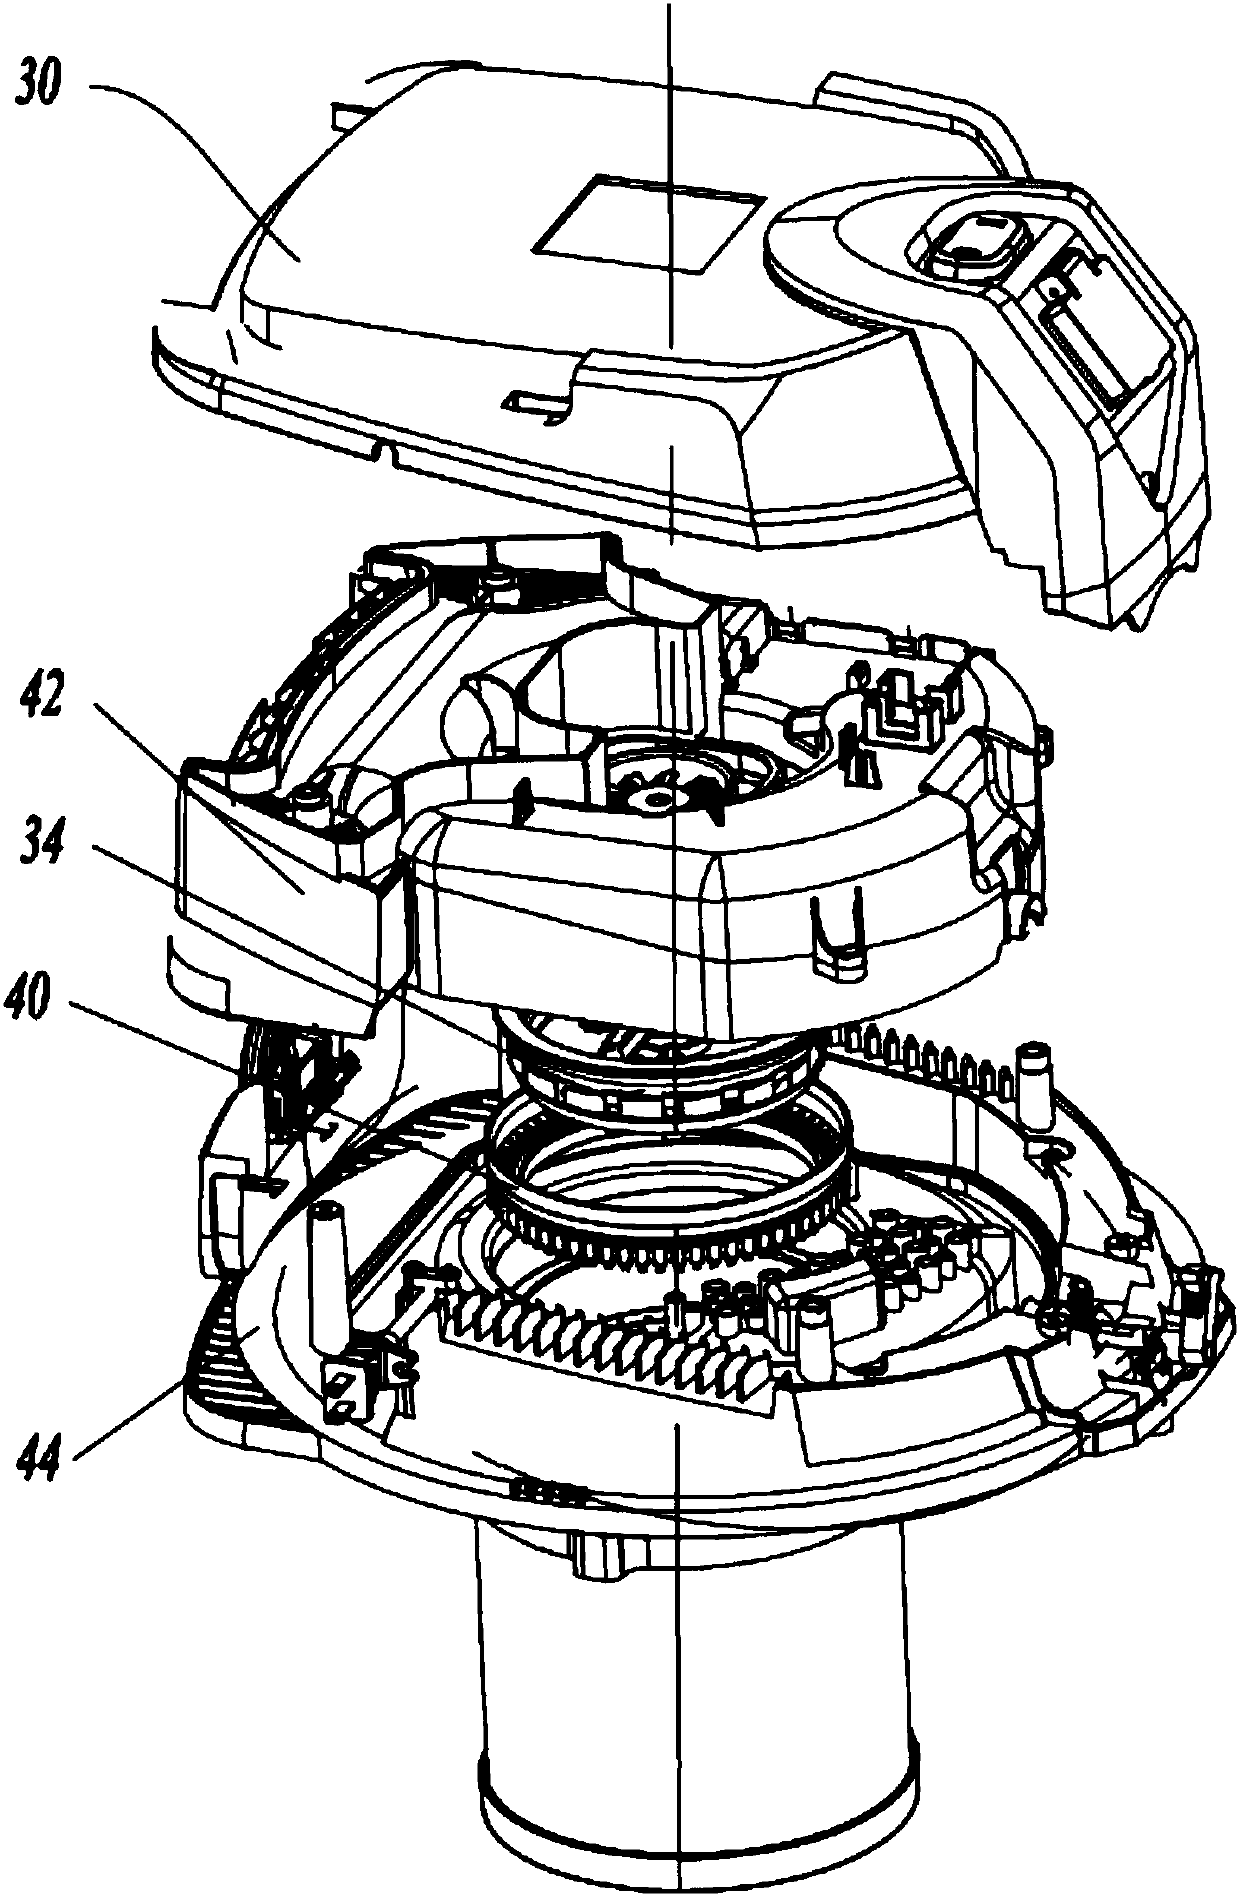 Sealing installation mechanism of motor in small and medium-sized electrical appliance